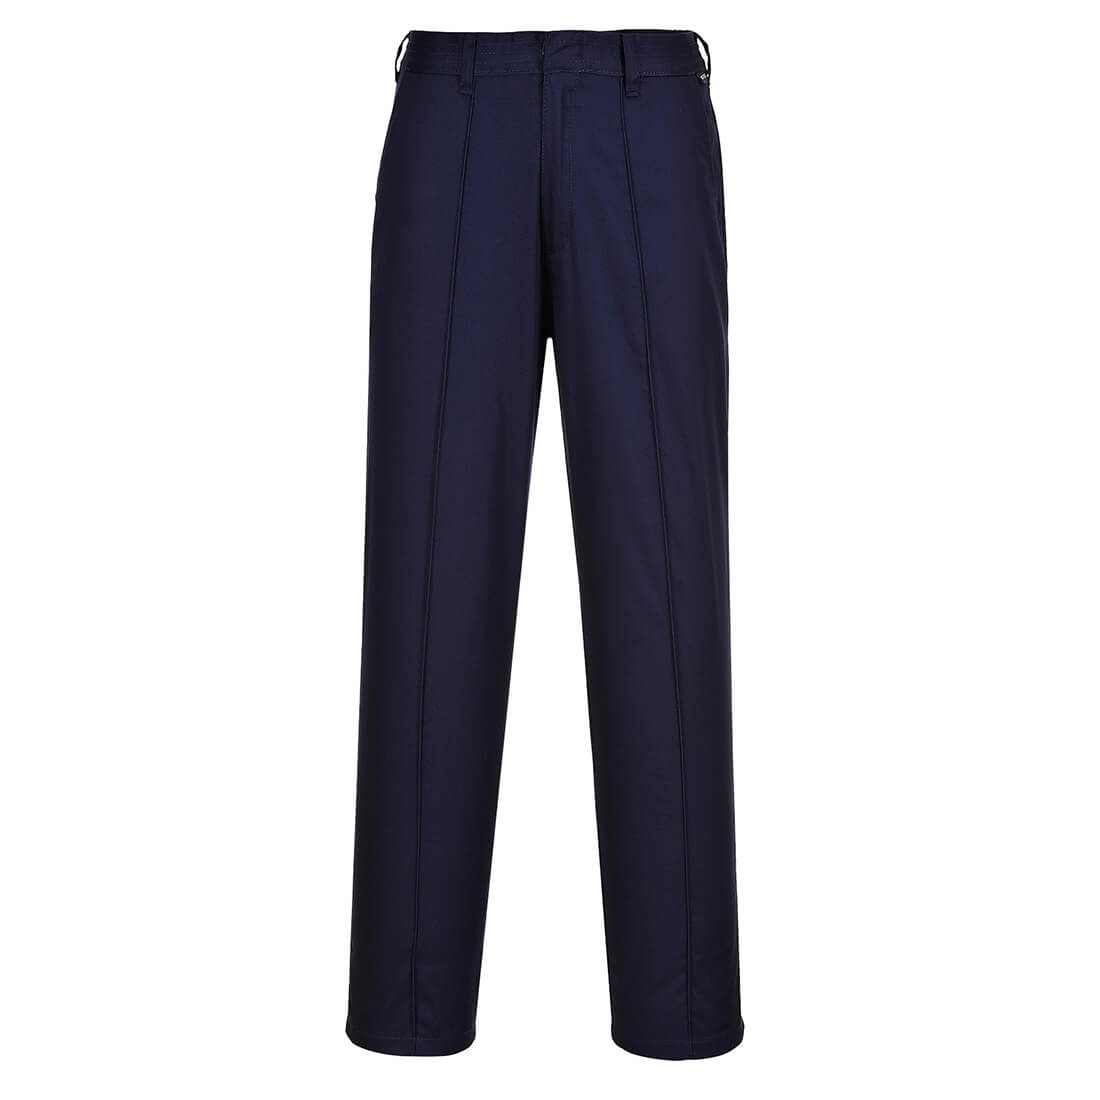 Image of Portwest LW97 ladies Elasticated Trousers Navy Blue XL 33"